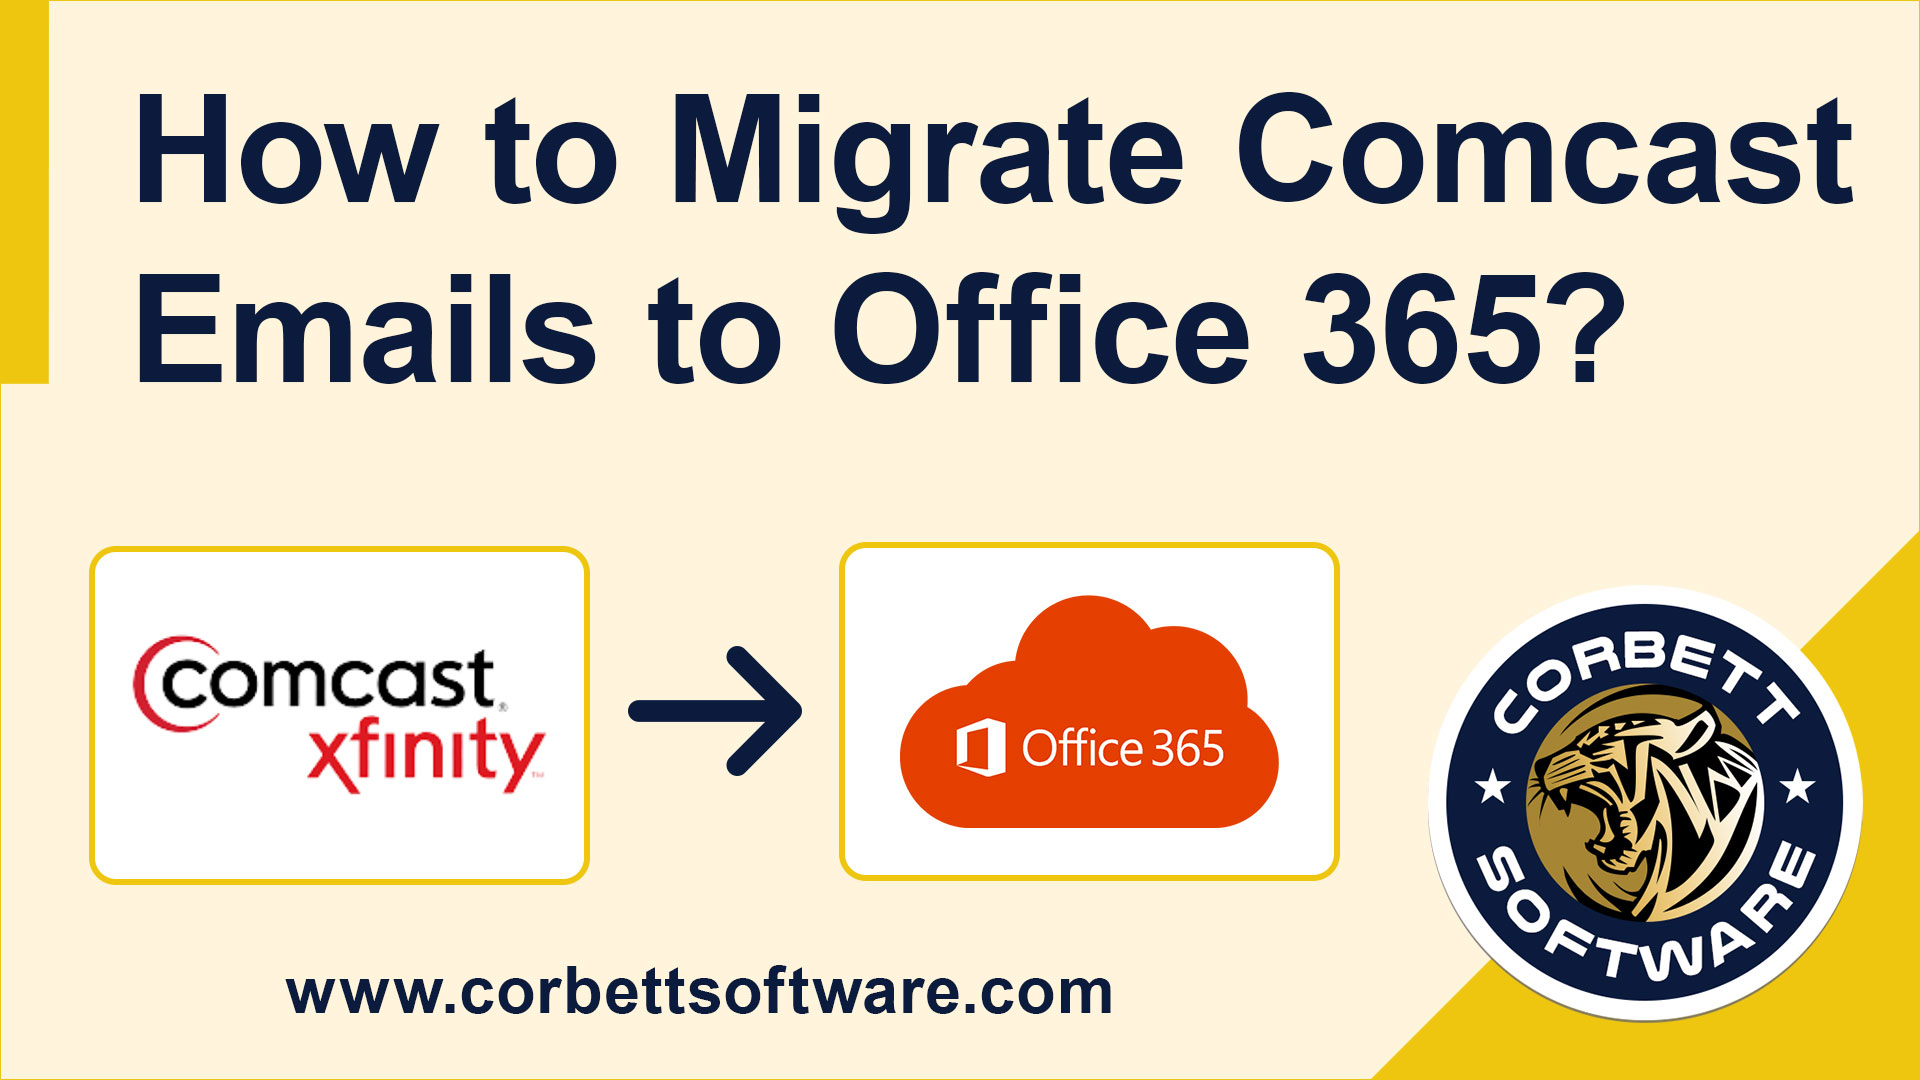 migrate comcast emails to office 365